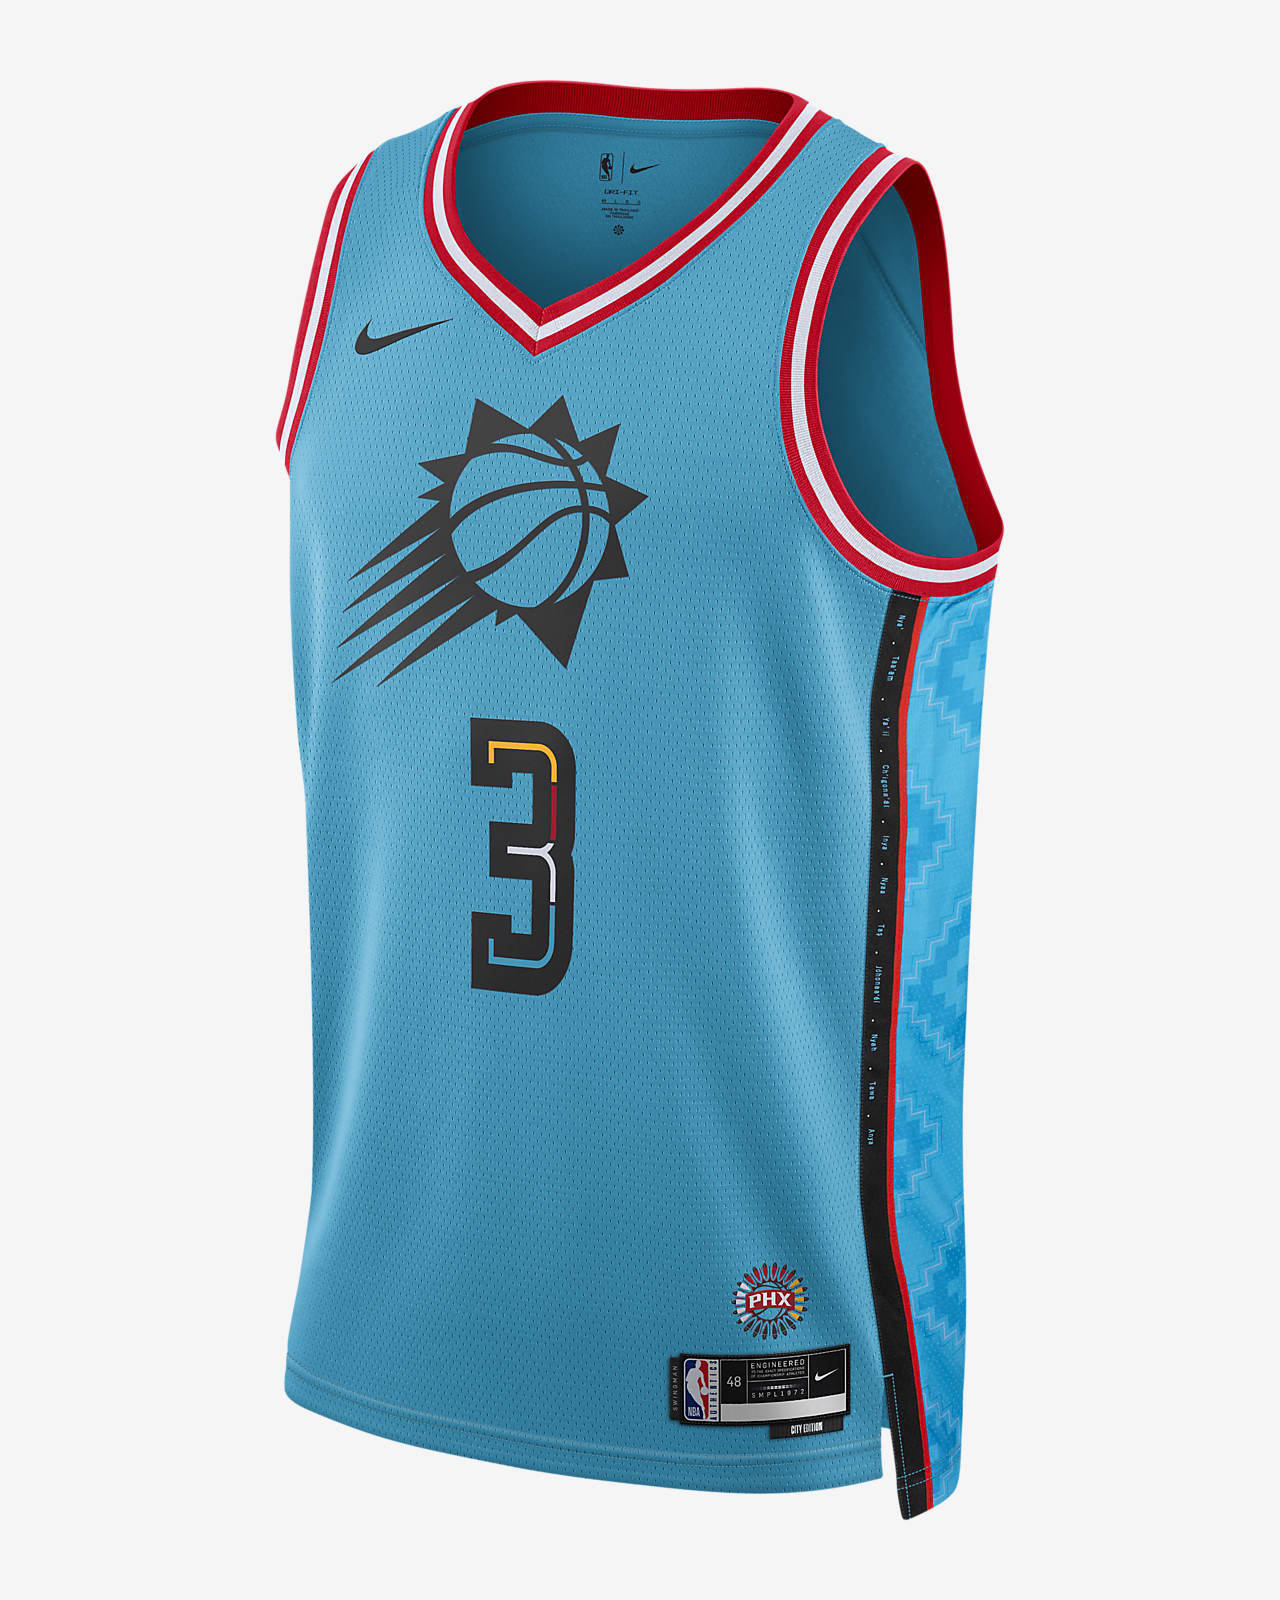 teal jersey